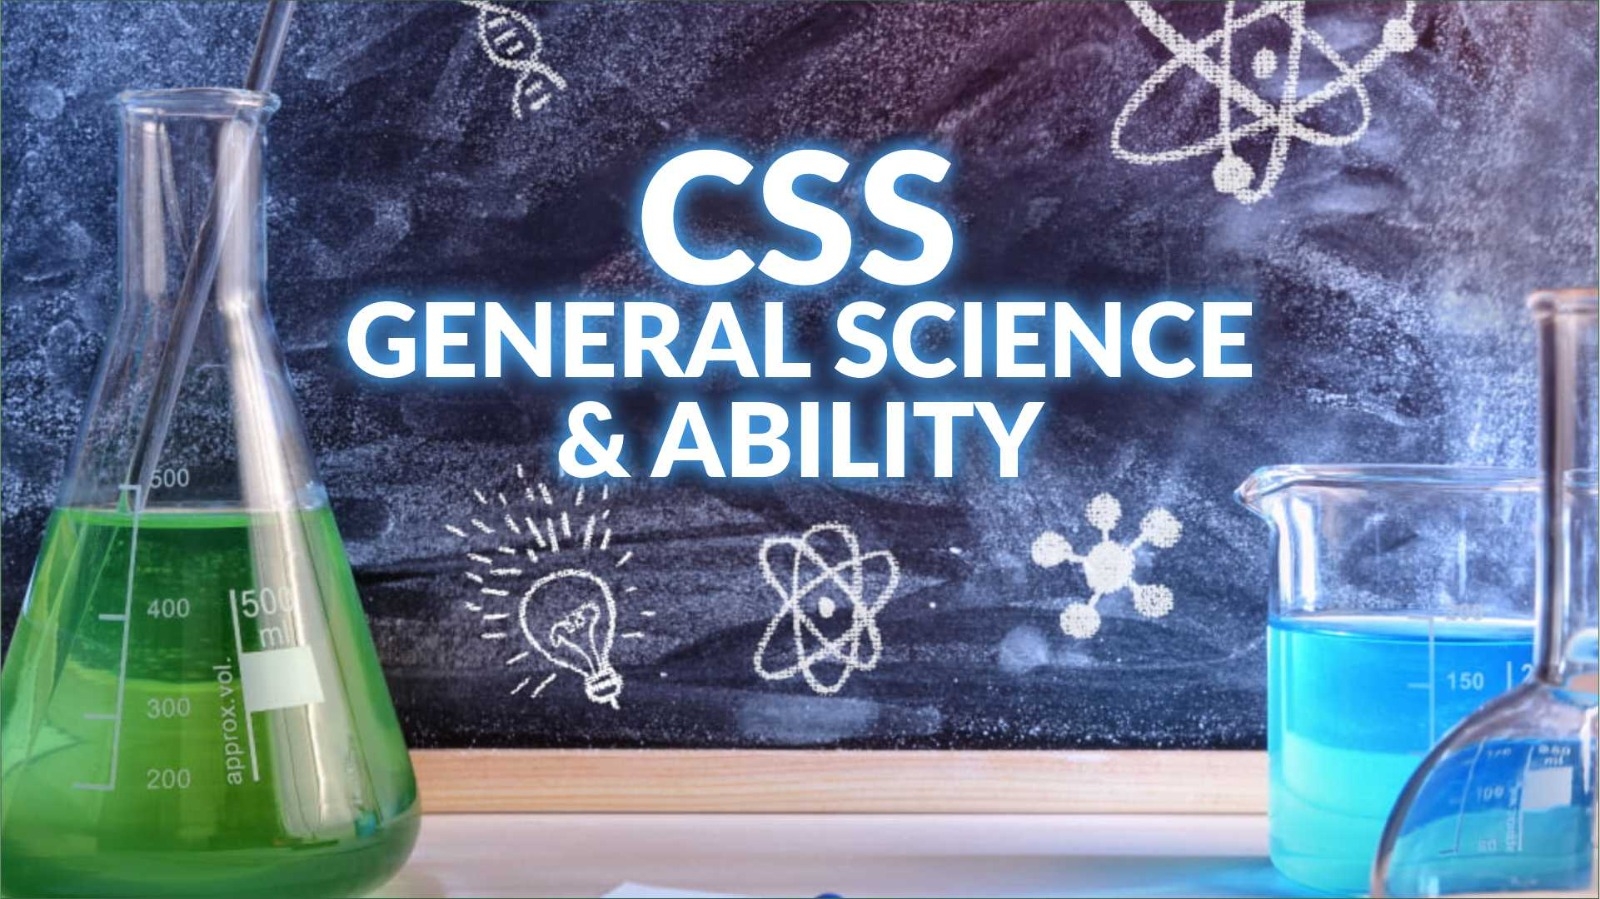 Ultimate CSS General Science & Ability Preparation Course